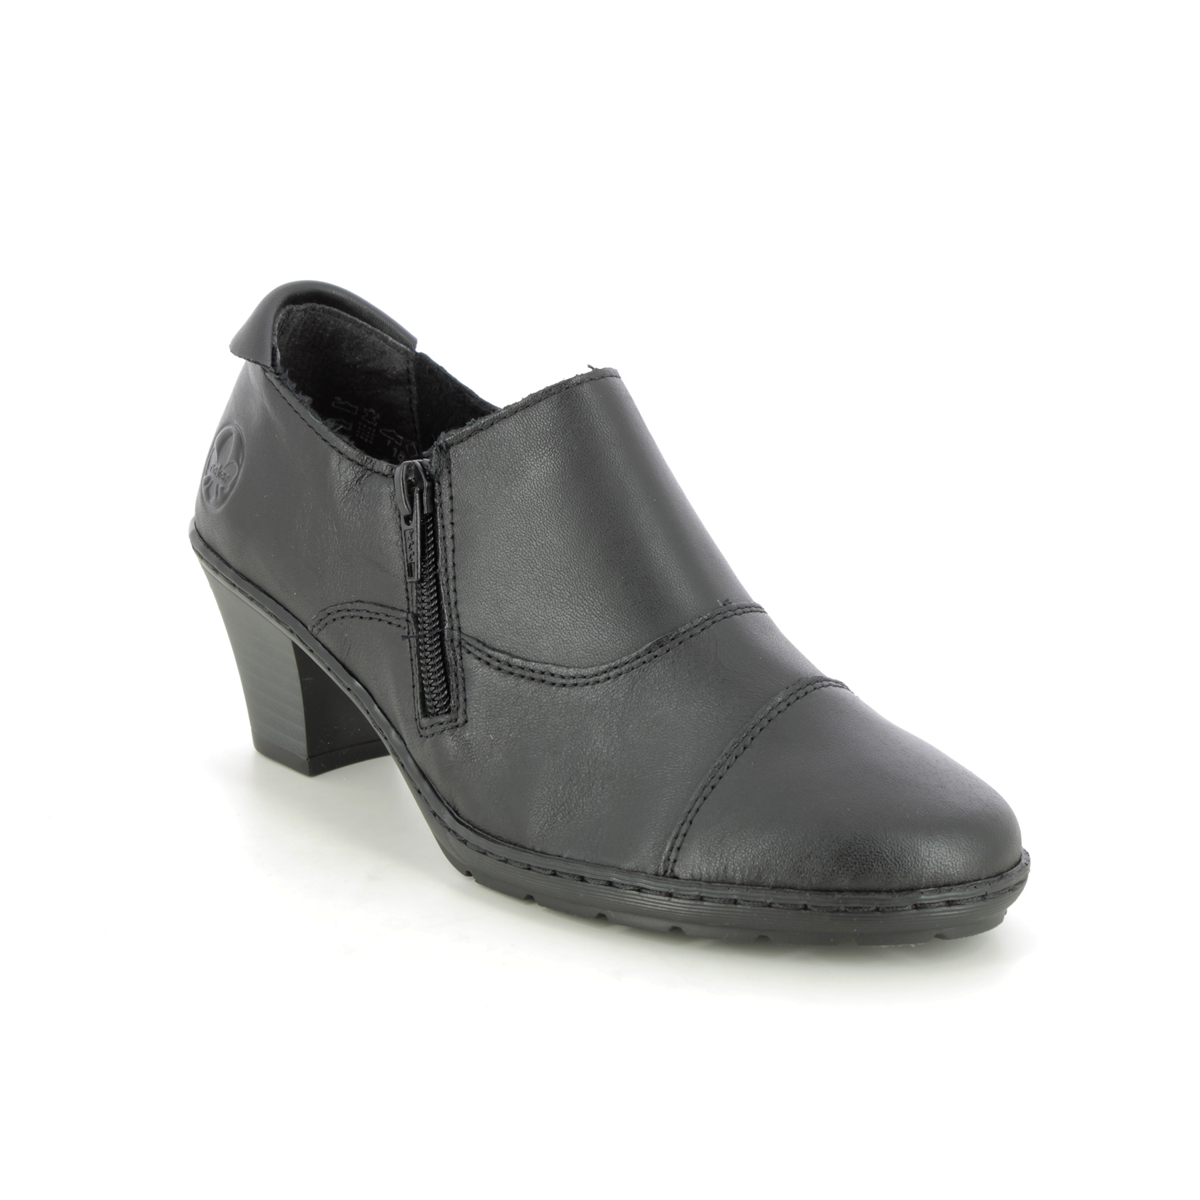 Rieker Addicap Black Leather Womens Shoe-Boots 57173-02 In Size 38 In Plain Black Leather